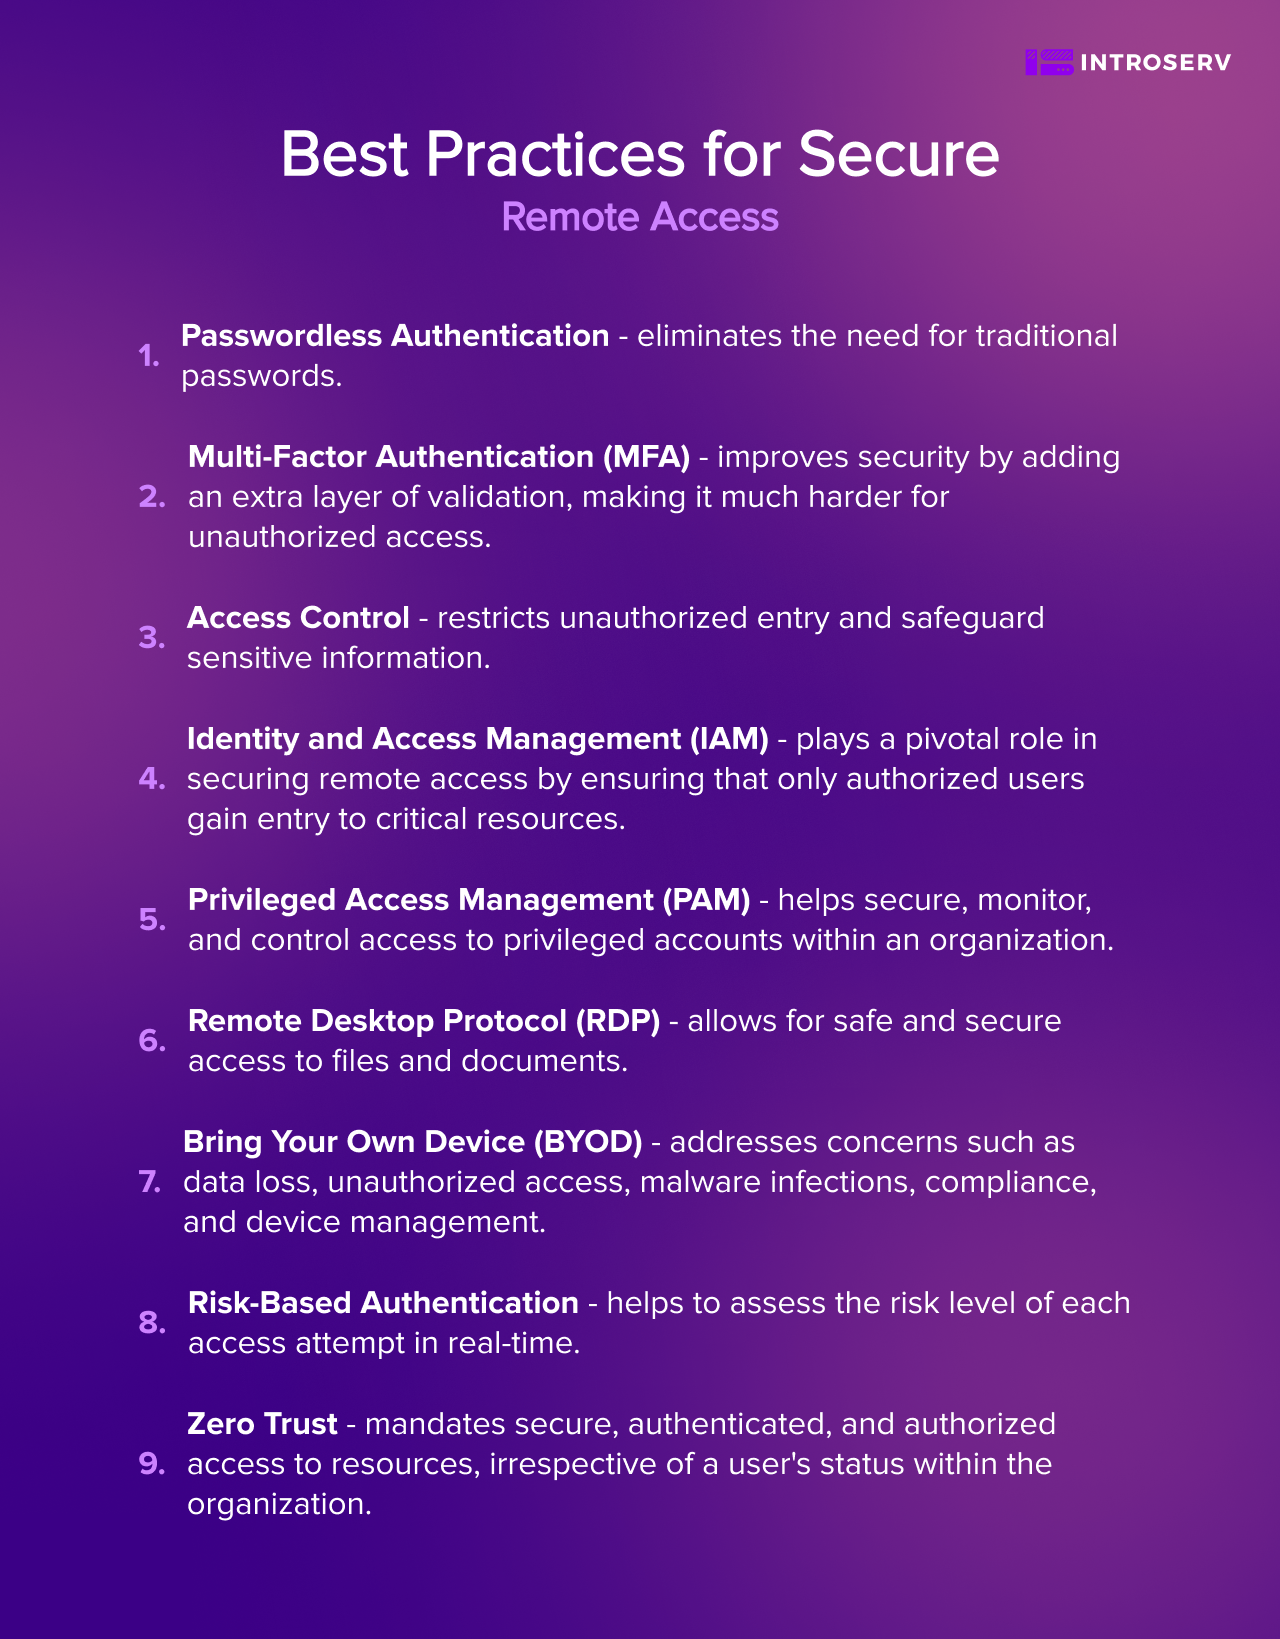 Best practices for secure remote access